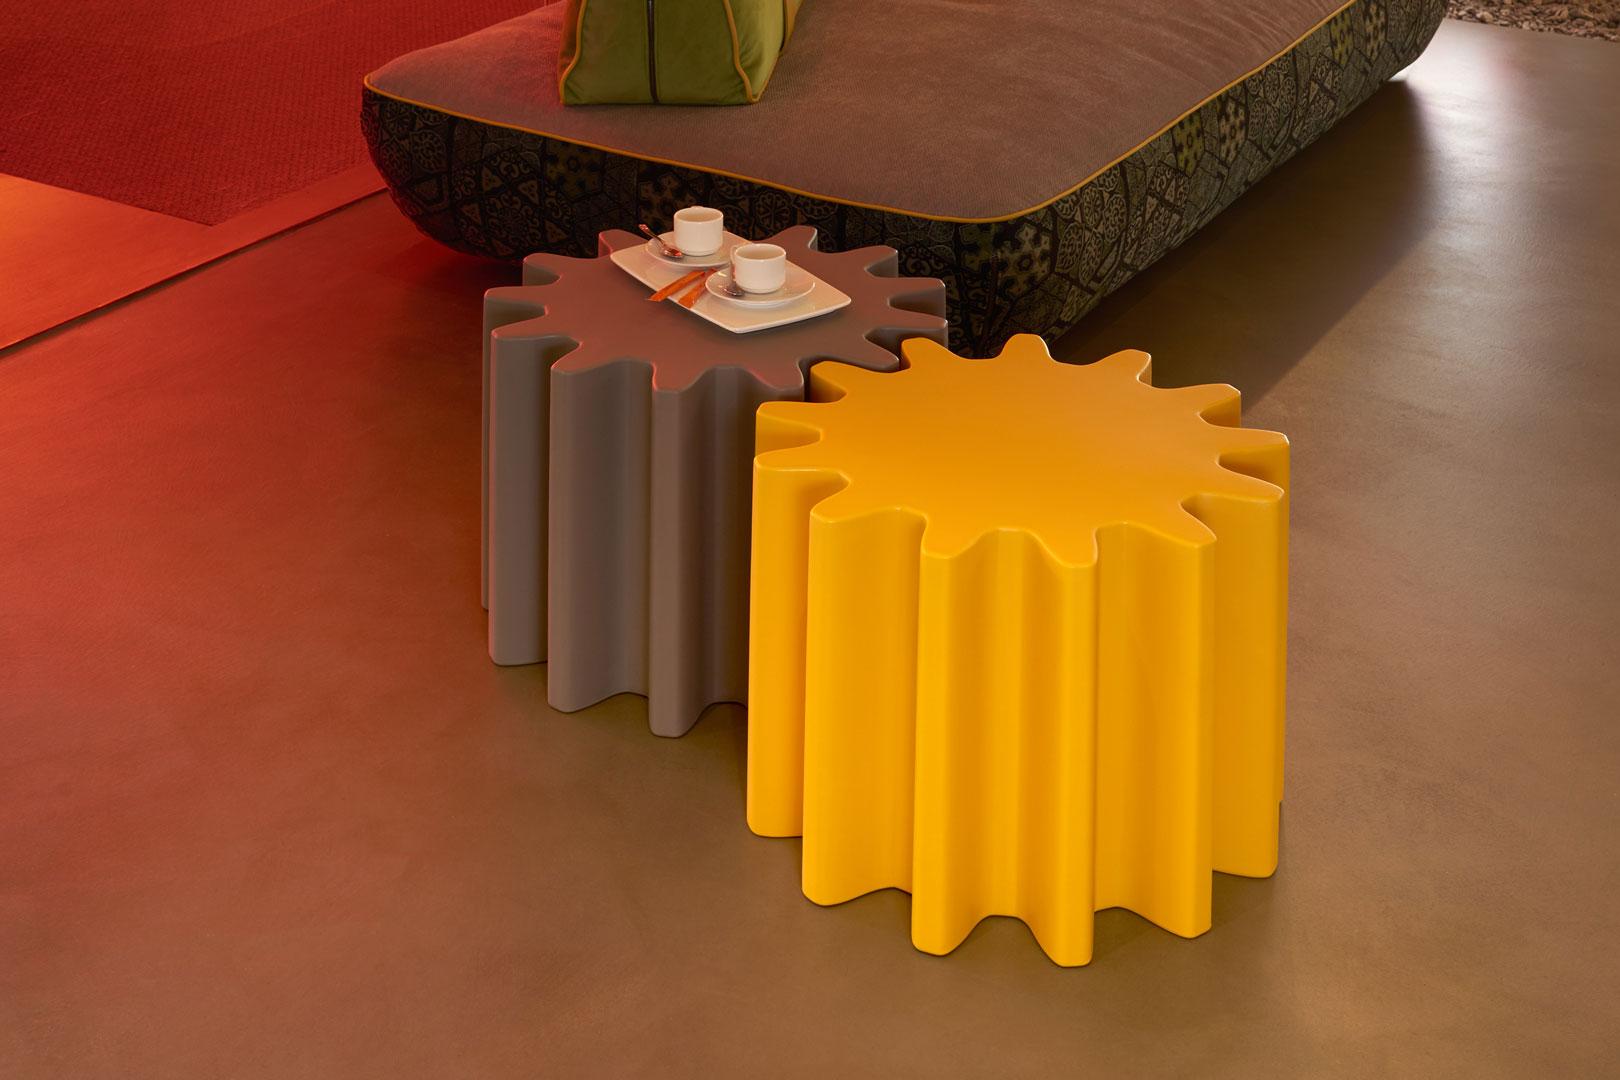 Chocolate Brown Gear Stool by Anastasia Ivanyuk
Dimensions: D 55 x W 55 x H 43 cm. Seat Height: 43 cm.
Materials: Polyethylene.
Weight: 6 kg.

Available in different color options. This product is suitable for indoor and outdoor use. Available in